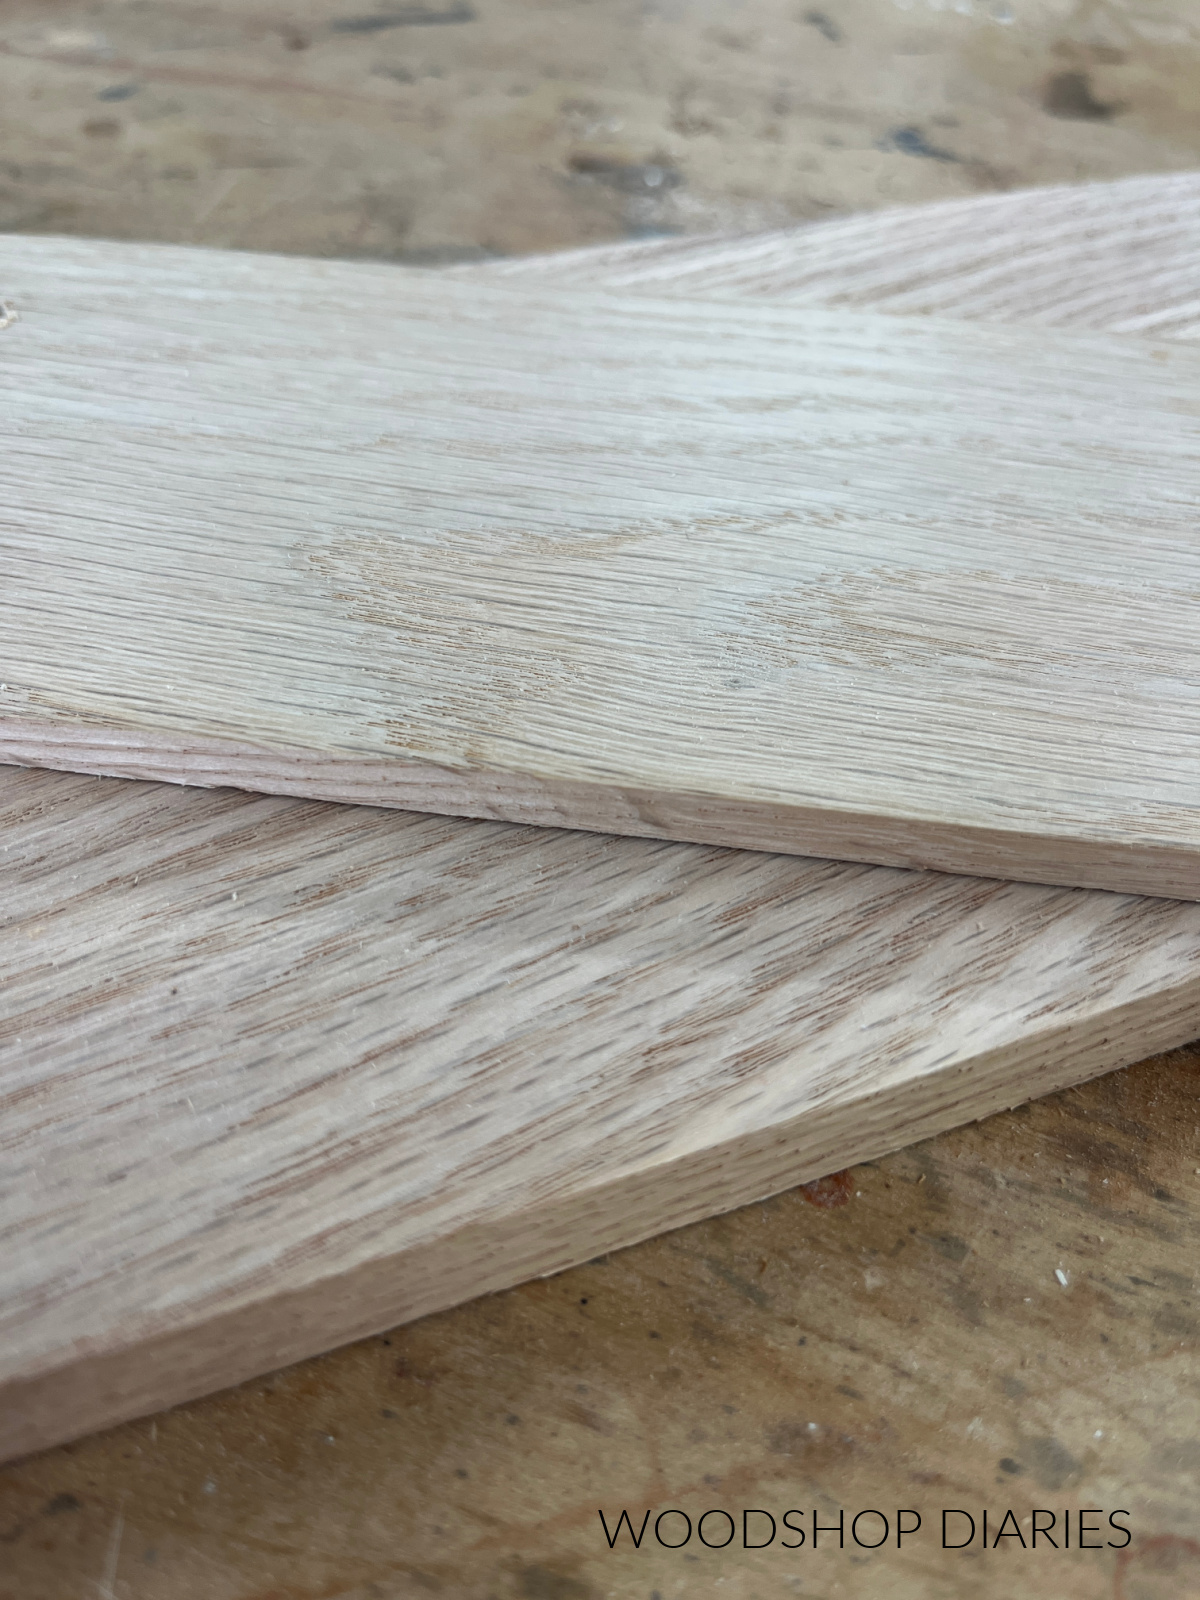 Close up of ¼" and ½" thick solid oak scraps on workbench